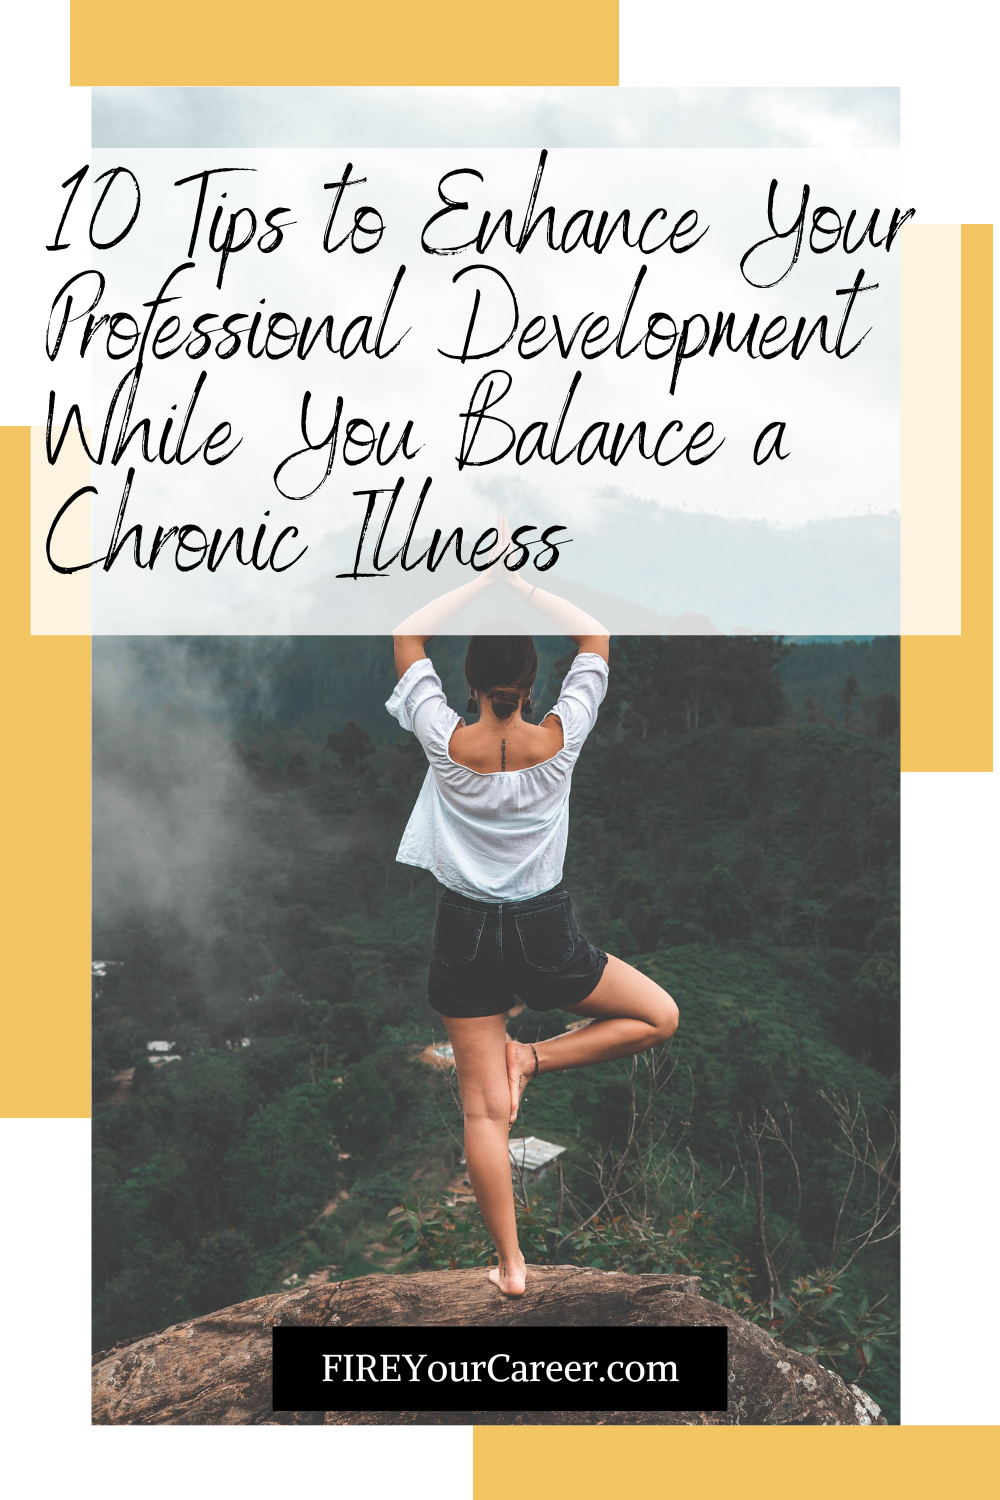 10 Tips to Enhance Your Professional Development While You Balance a Chronic Illness